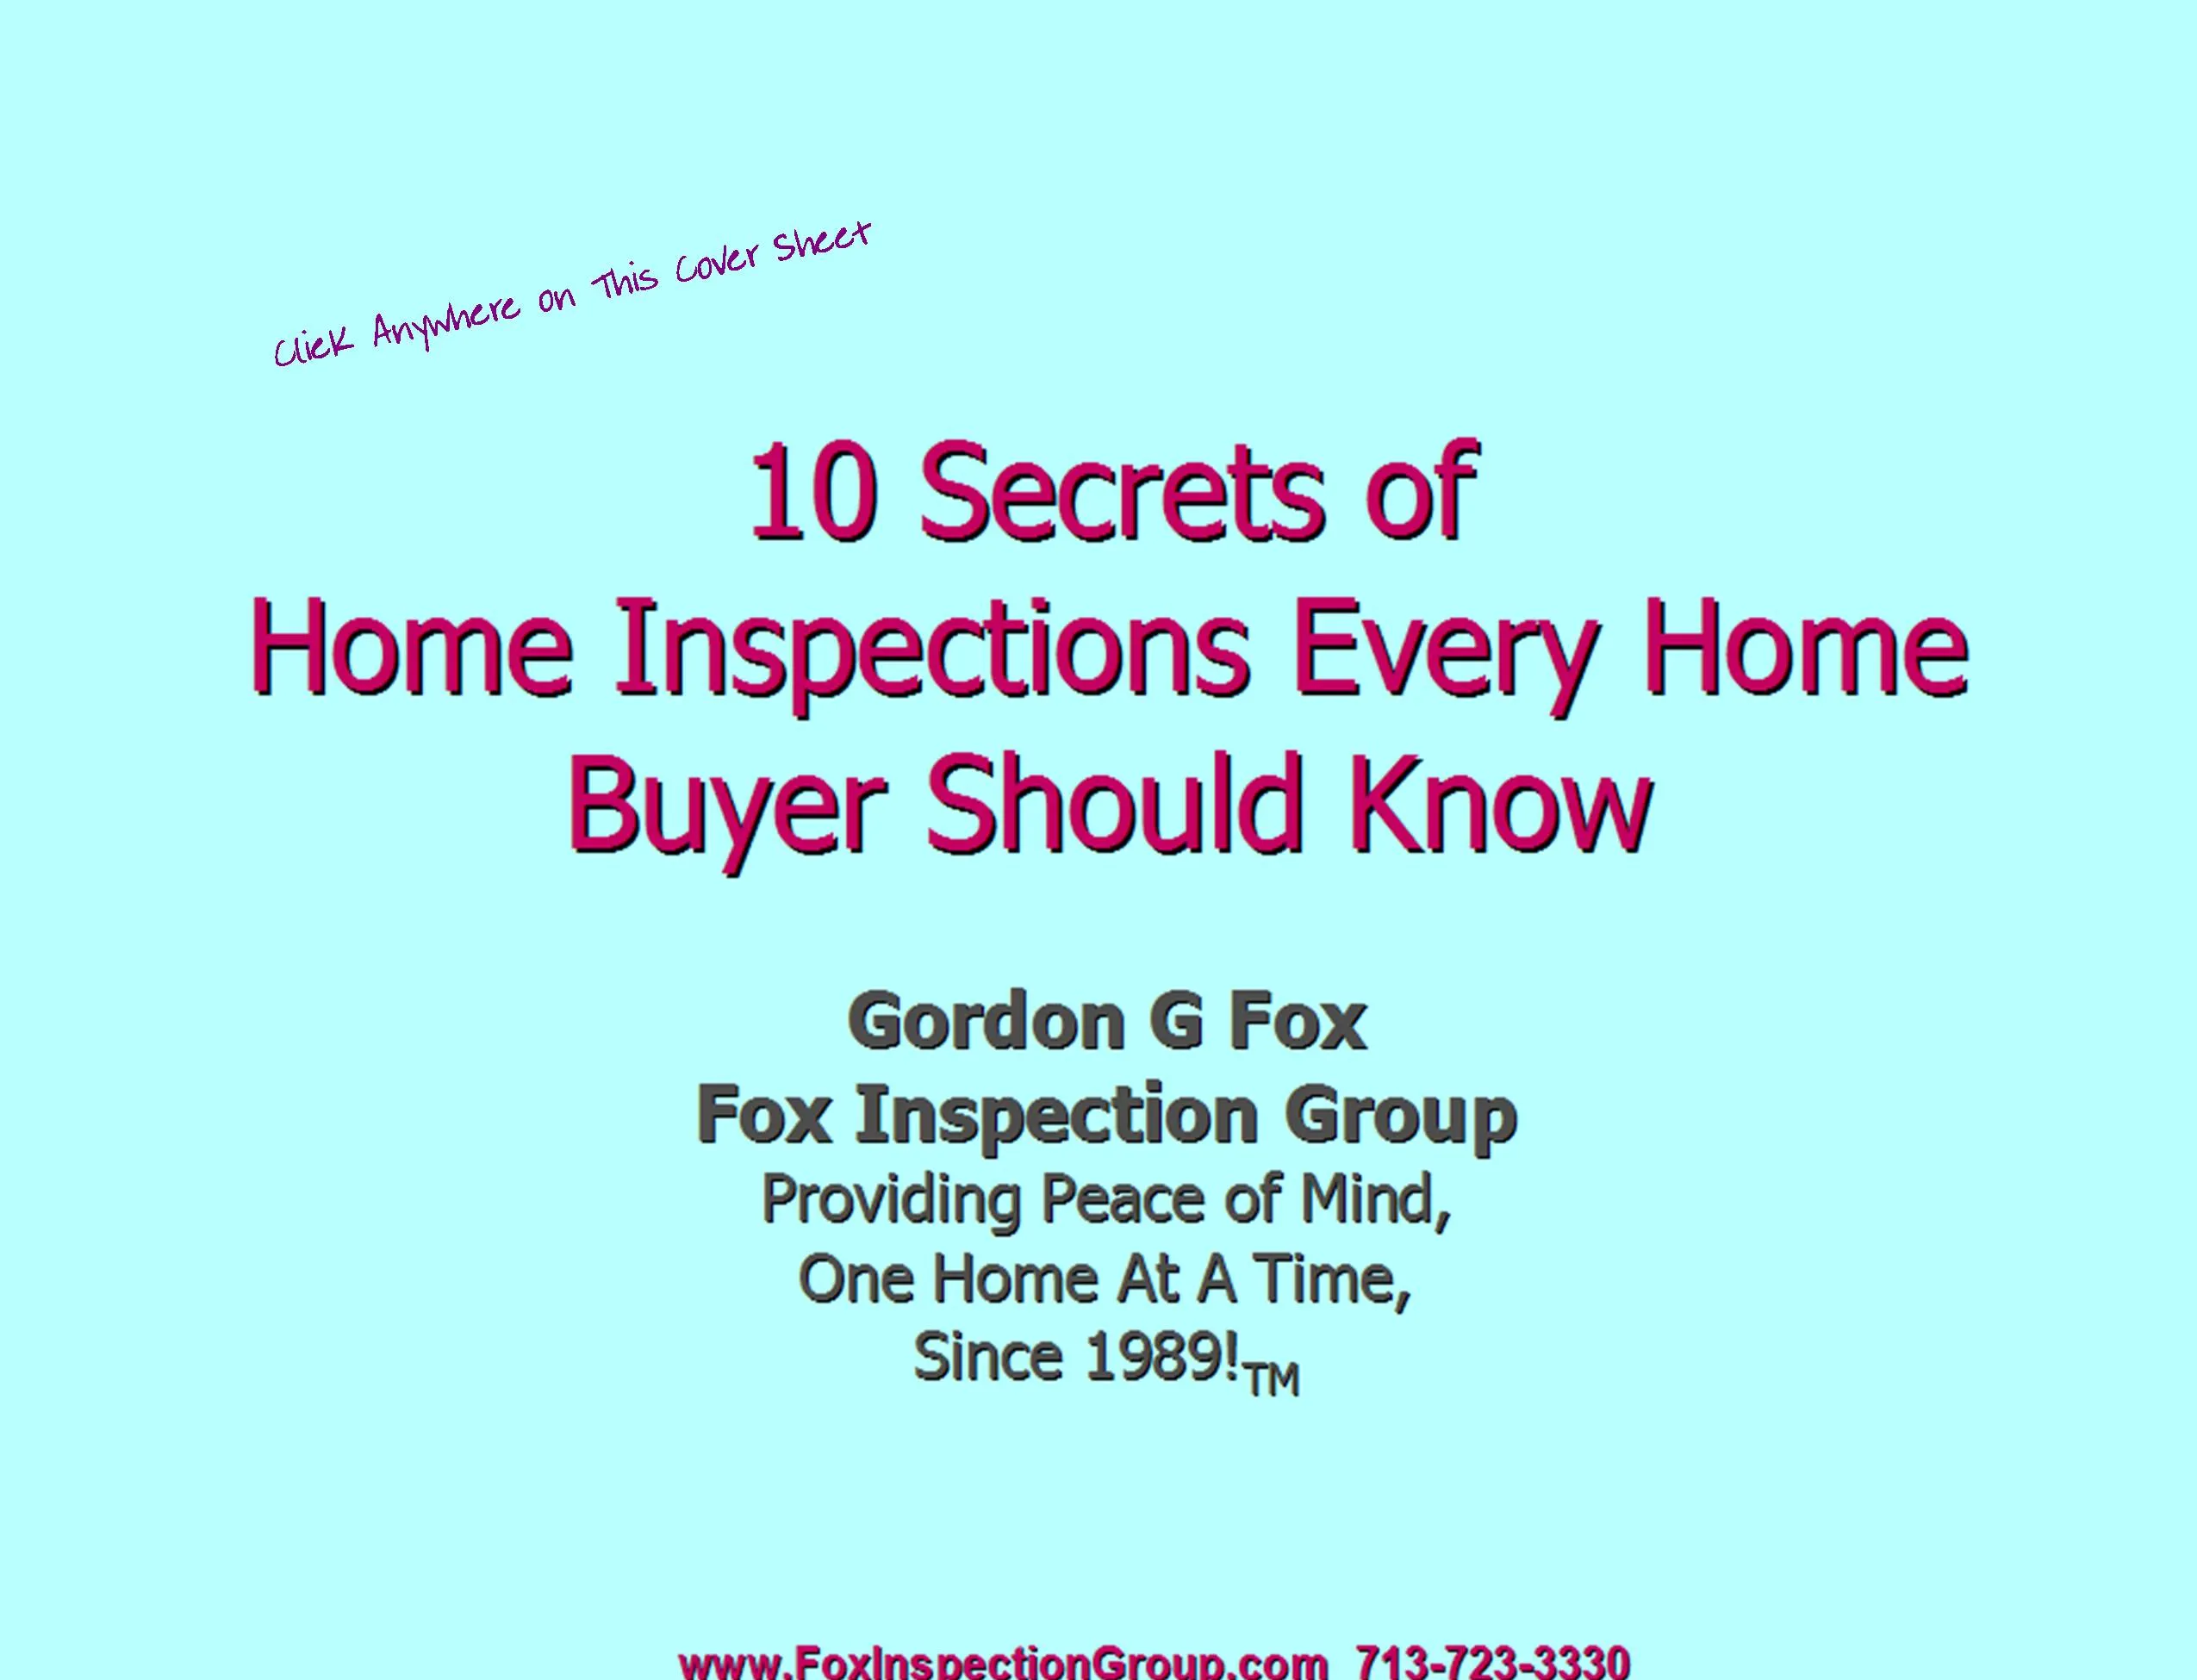 10 Secrets of Home Inspections cover